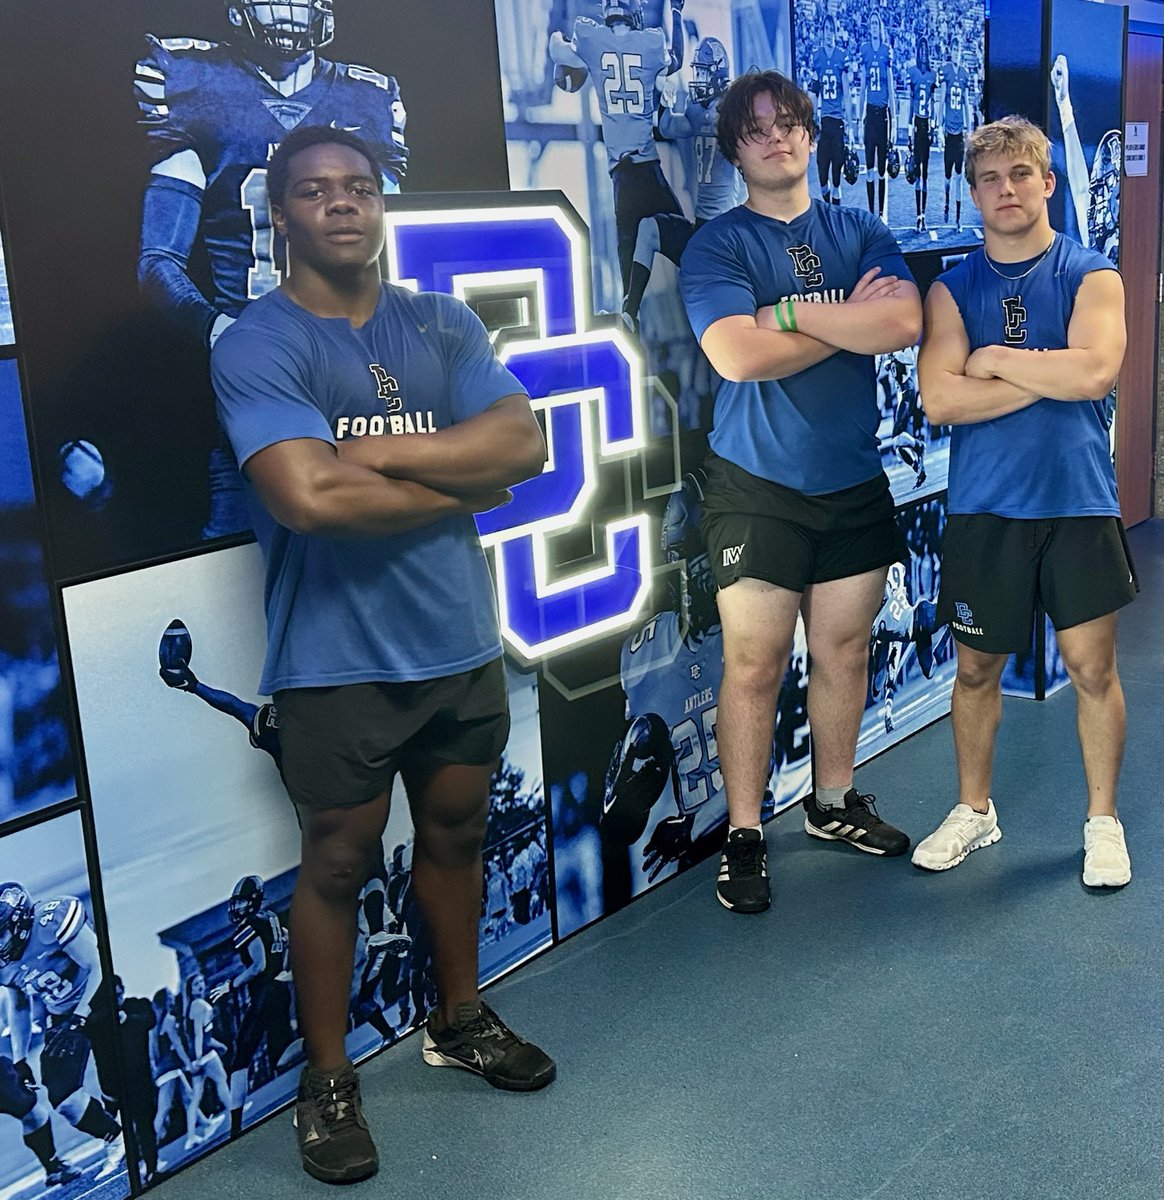 BEASTS of The Creek!!! 3 of the most dependable, hardest working leaders in The Creek Football program. Junior Youmbi, Mark St. Peter, and Brady Brewer are great examples of what we do as a program.